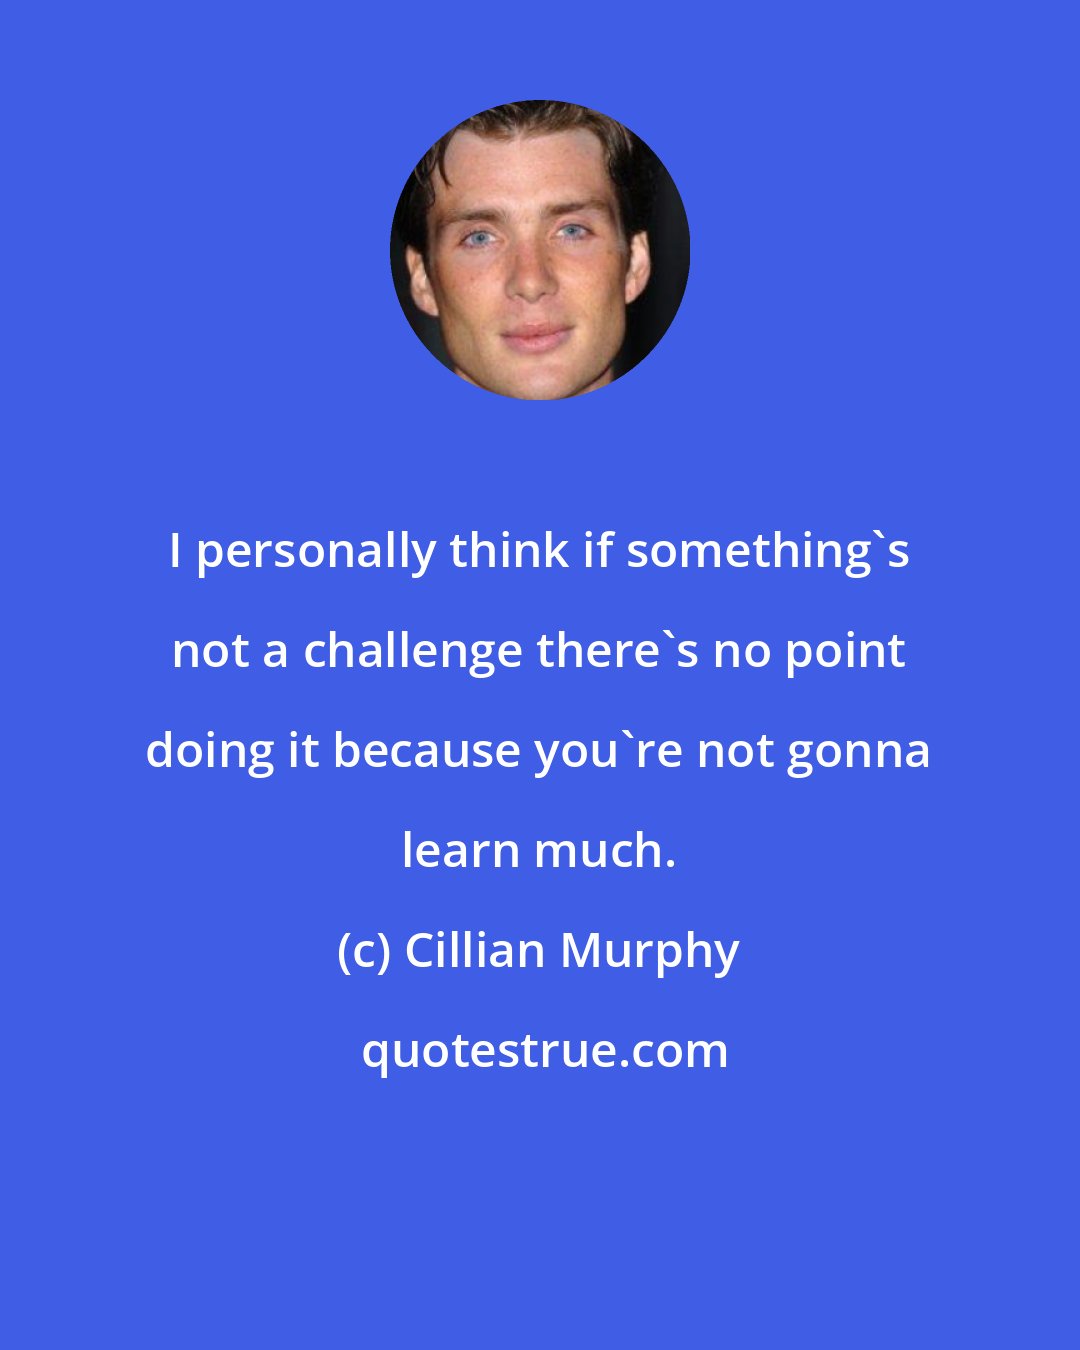 Cillian Murphy: I personally think if something's not a challenge there's no point doing it because you're not gonna learn much.